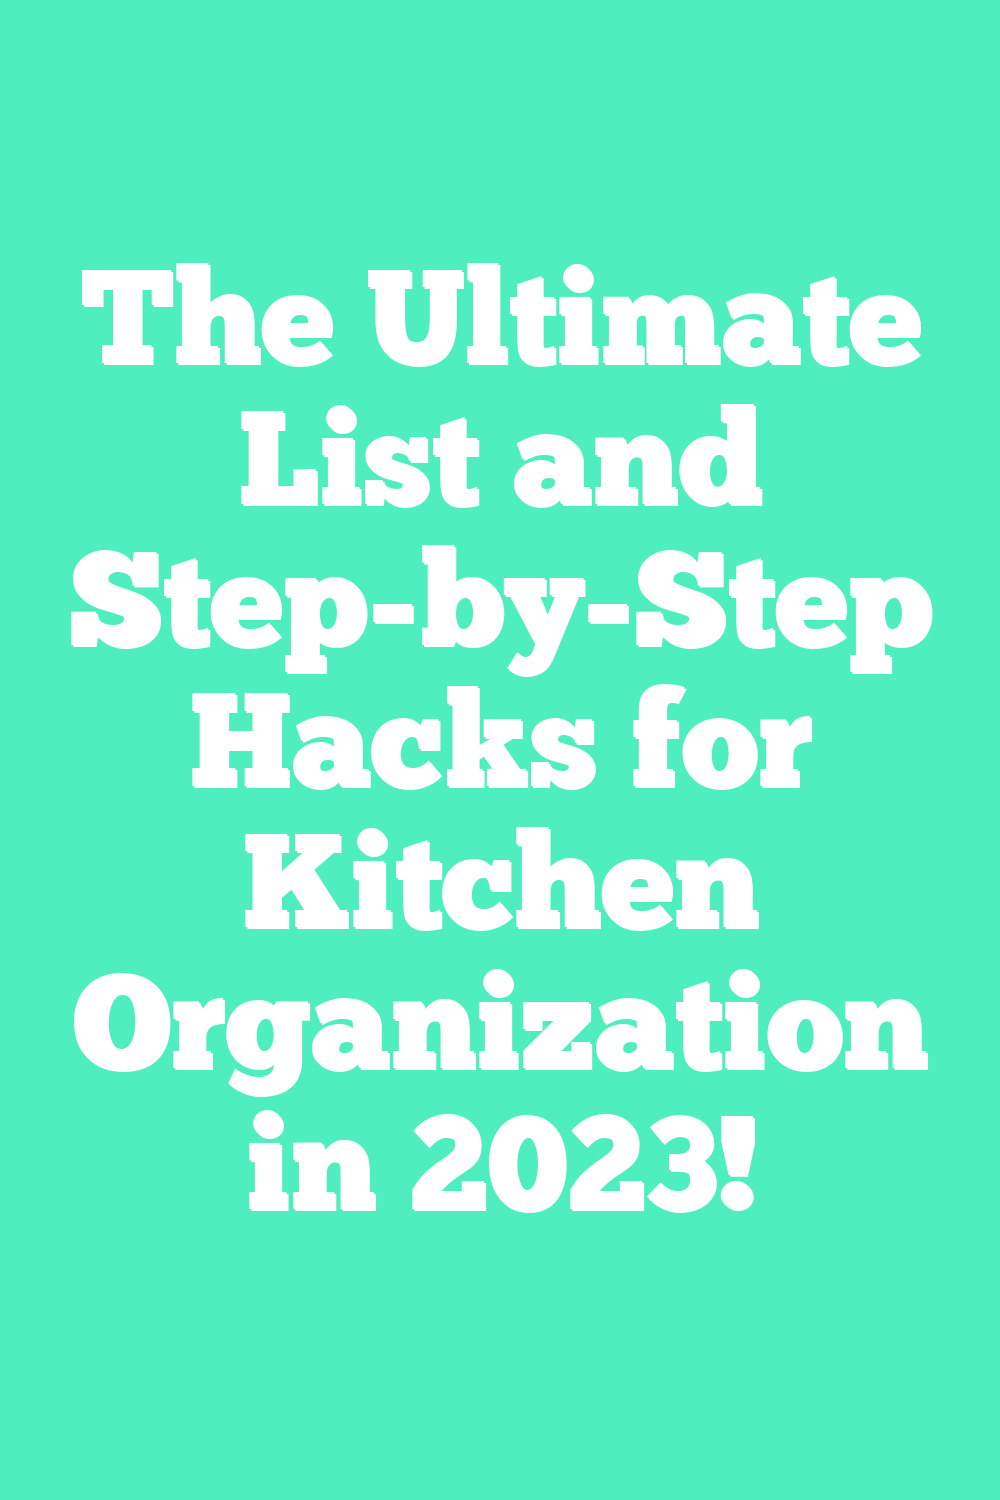 The Ultimate List and Step-by-Step Hacks for Kitchen Organization in 2023!